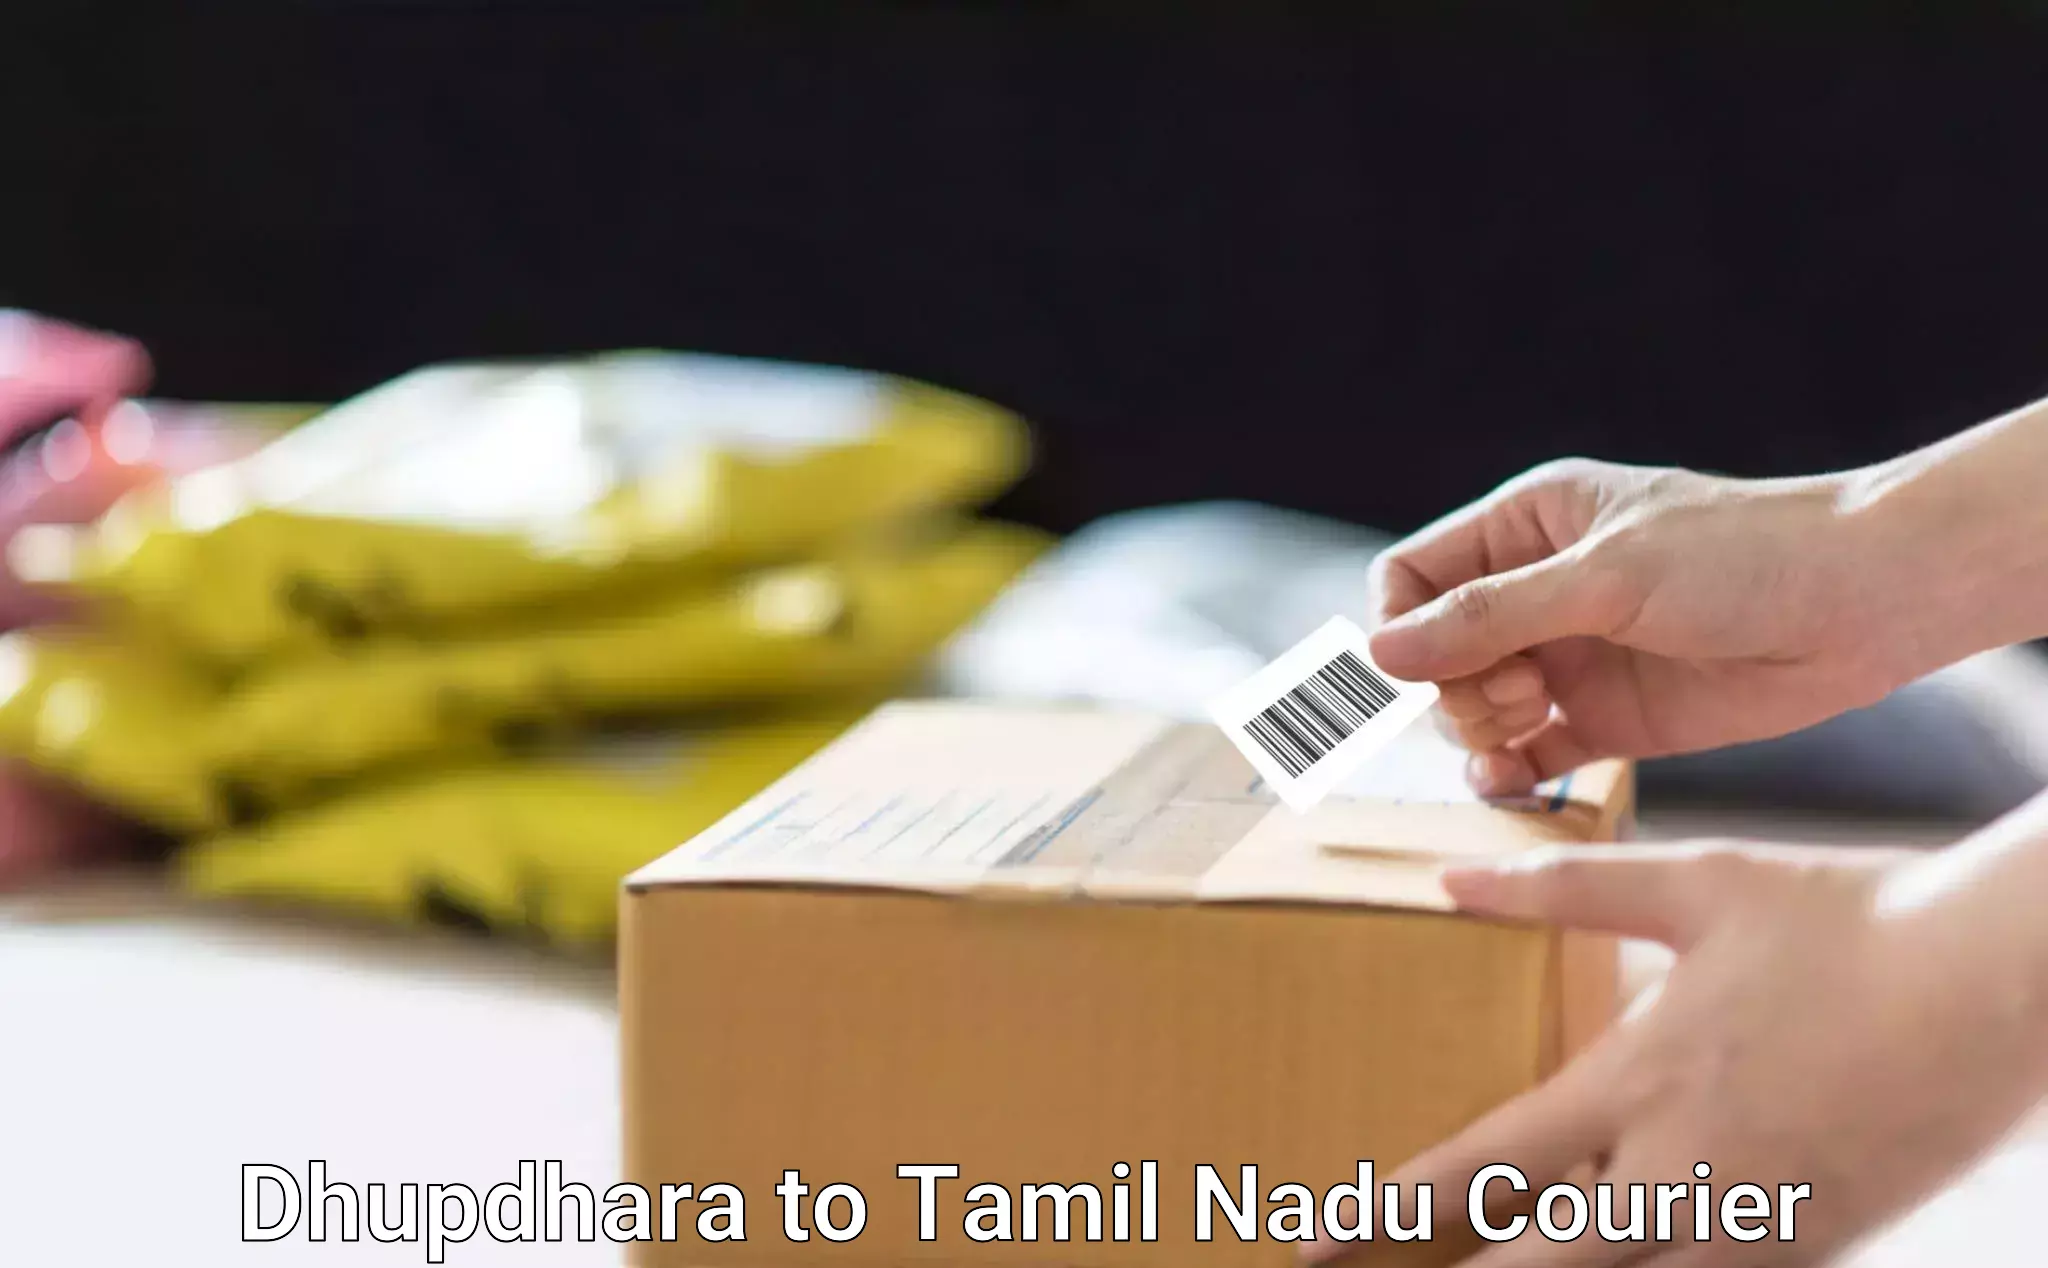 Personalized courier solutions Dhupdhara to Ennore Port Chennai